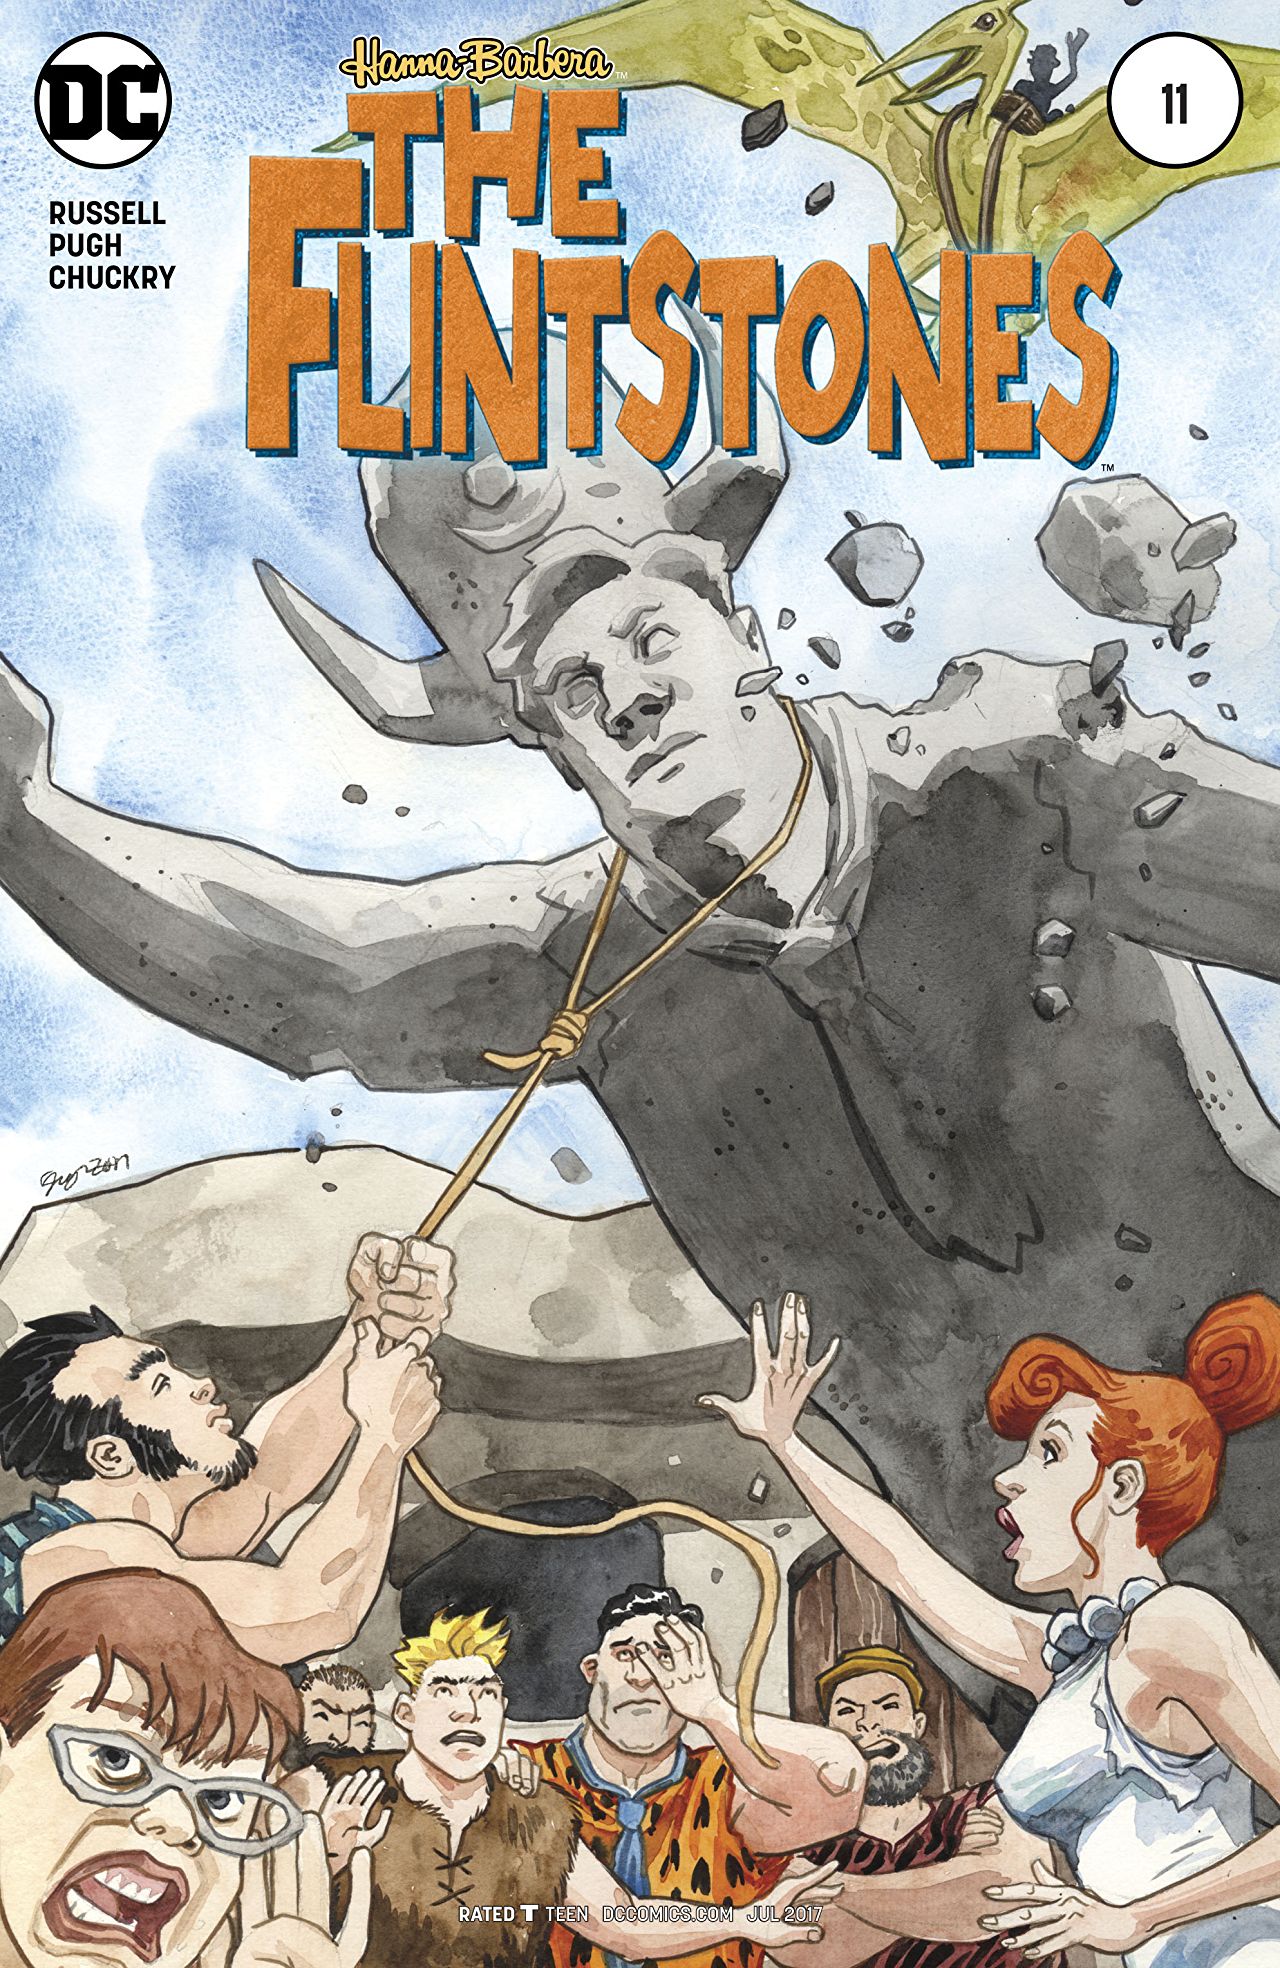 variant covers available !!! The Flintstones NEW DC Comic #1 